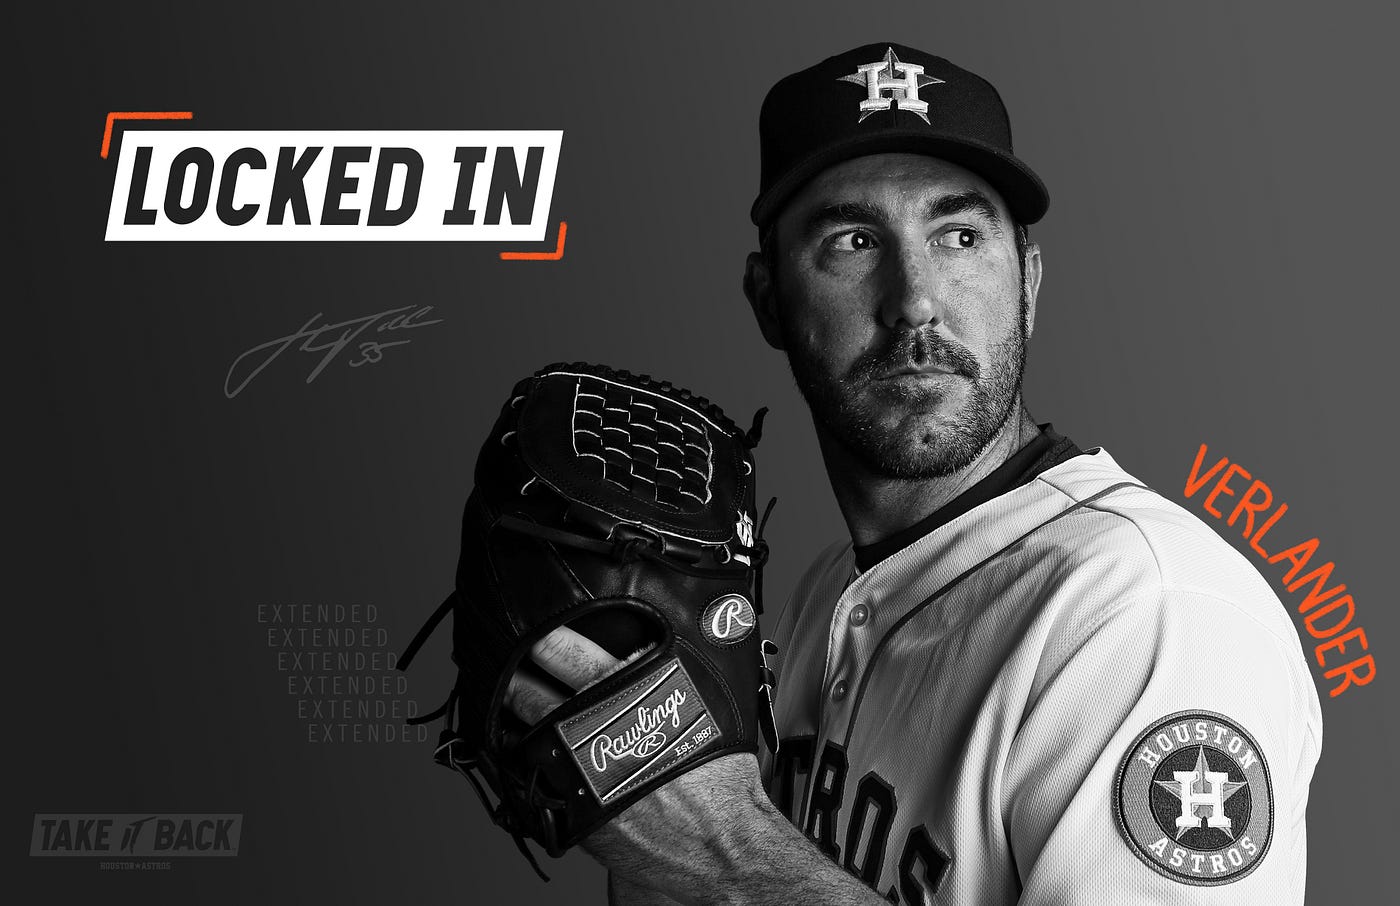 Astros sign Justin Verlander to three-year contract, by Houston Astros